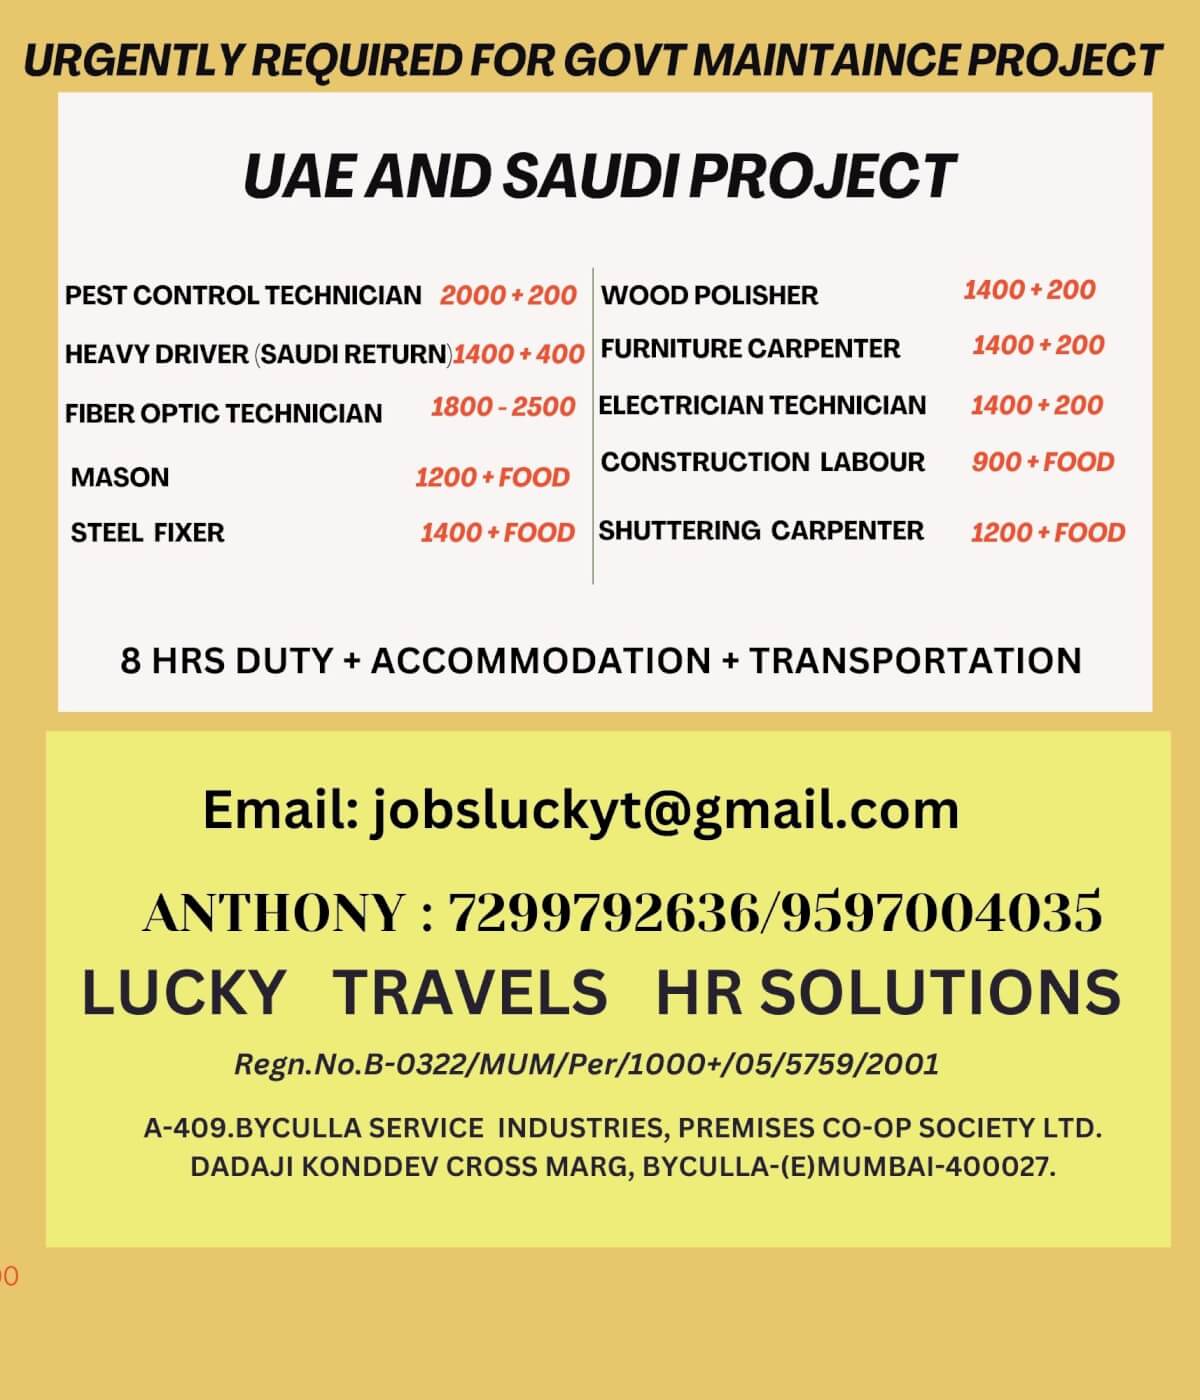 Urgently Required for Maintainance Project for UAE & SAUDI / ONLINE INTERVIEW & CV SELECTION / CONTACT MR.ANTHONY 7299792636